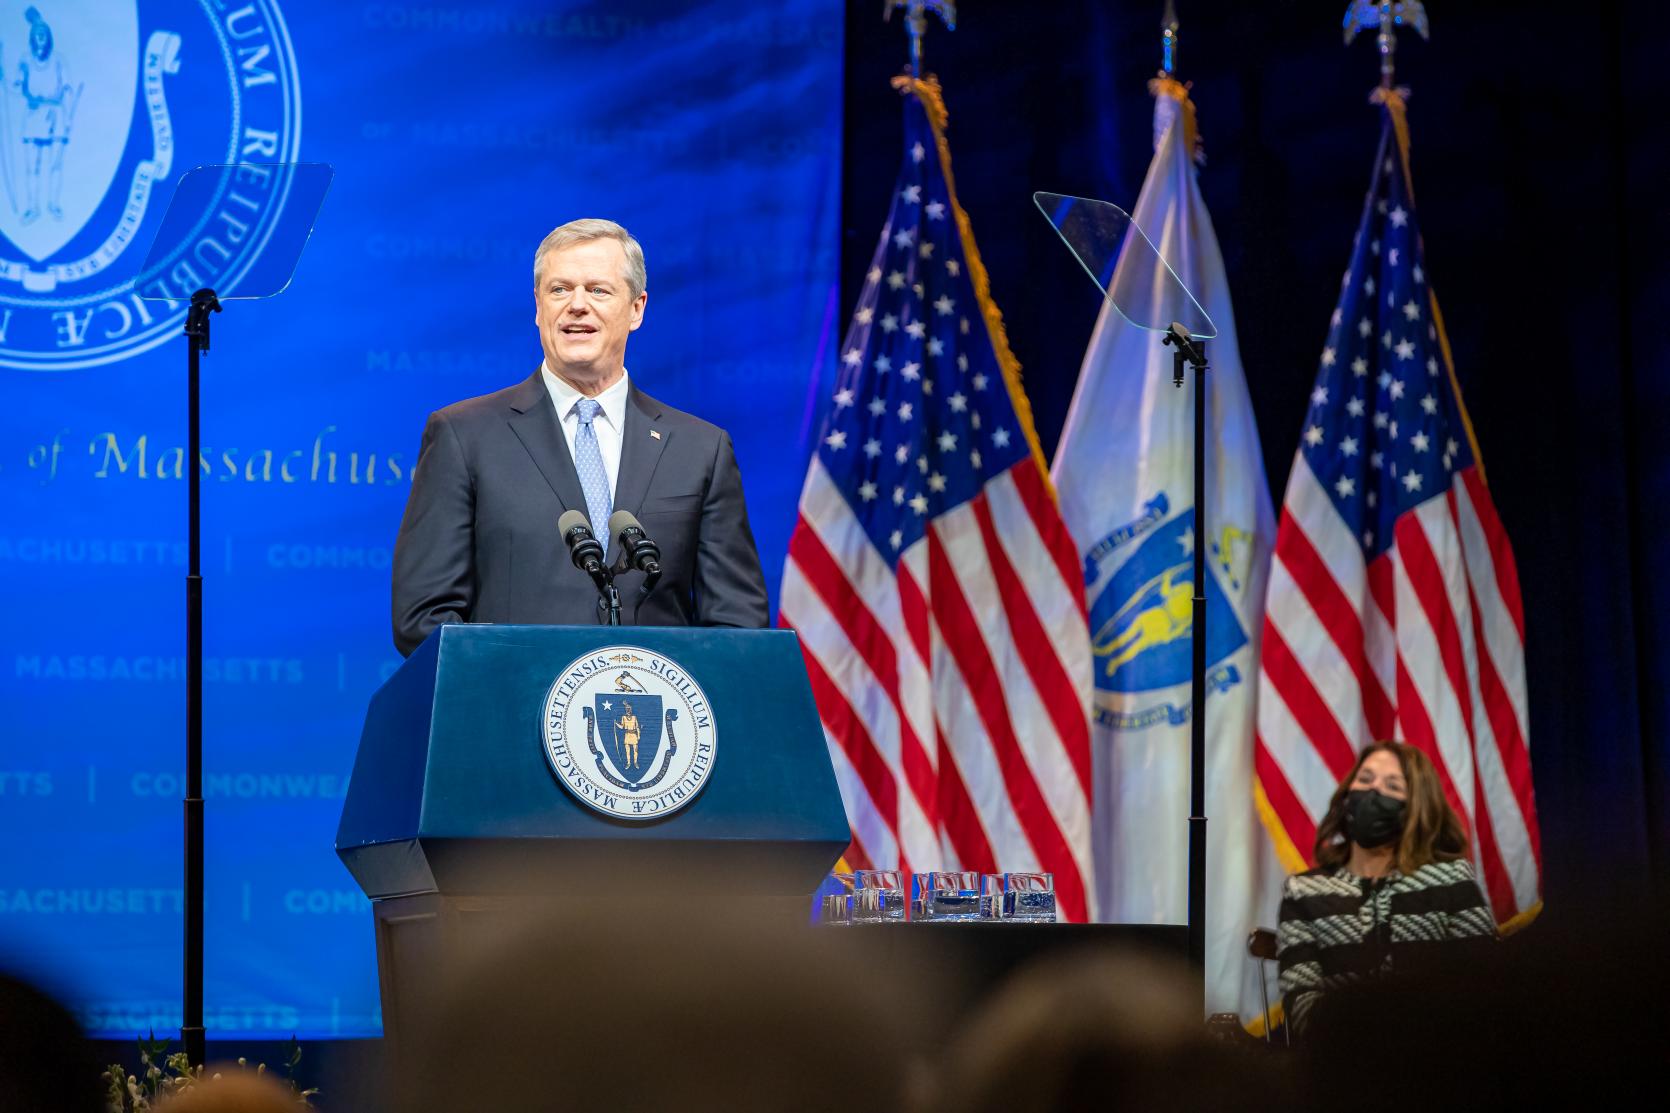 Governor Baker Delivers 2022 State of the Commonwealth Address